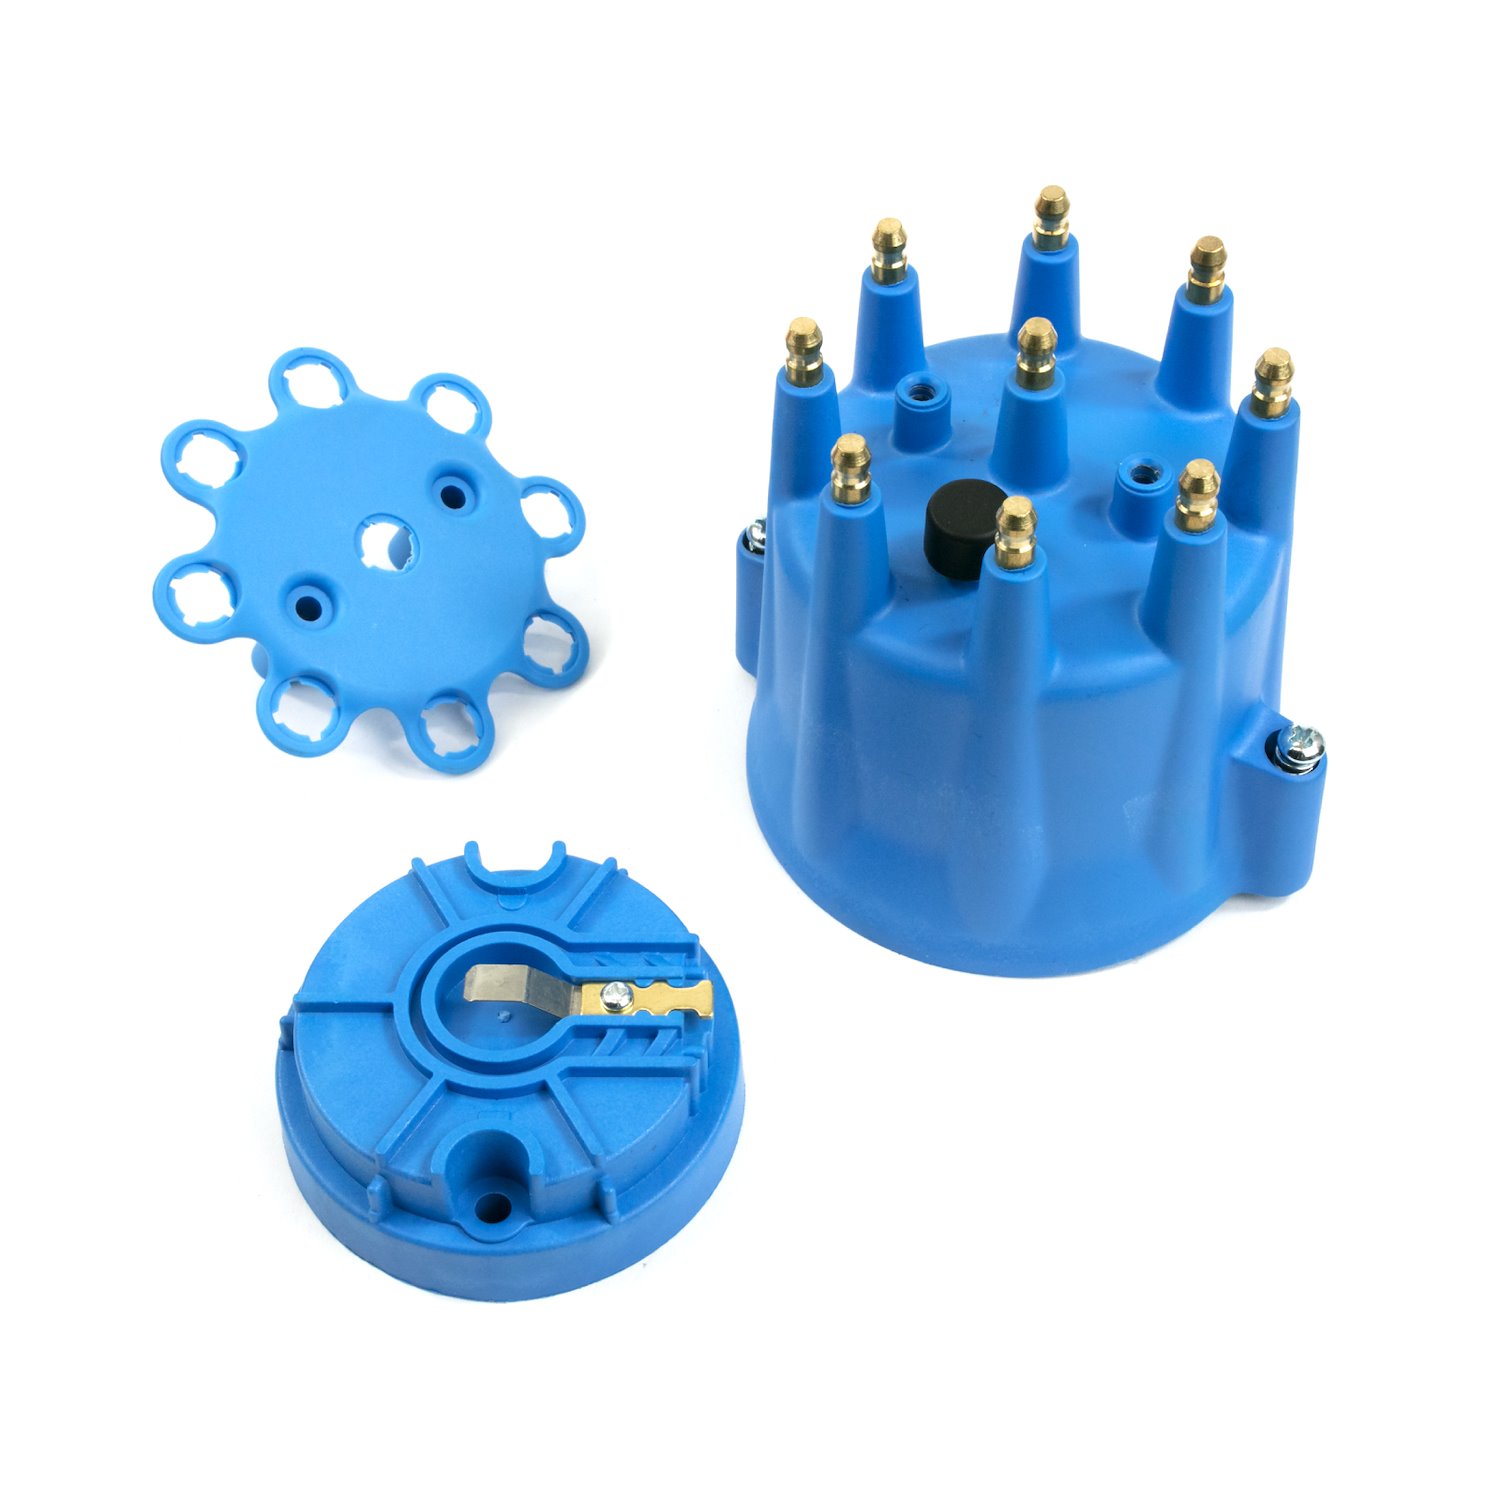 JM6973BL Pro Series Distributor Cap and Rotor Kit, 8 Cylinder Male, Blue